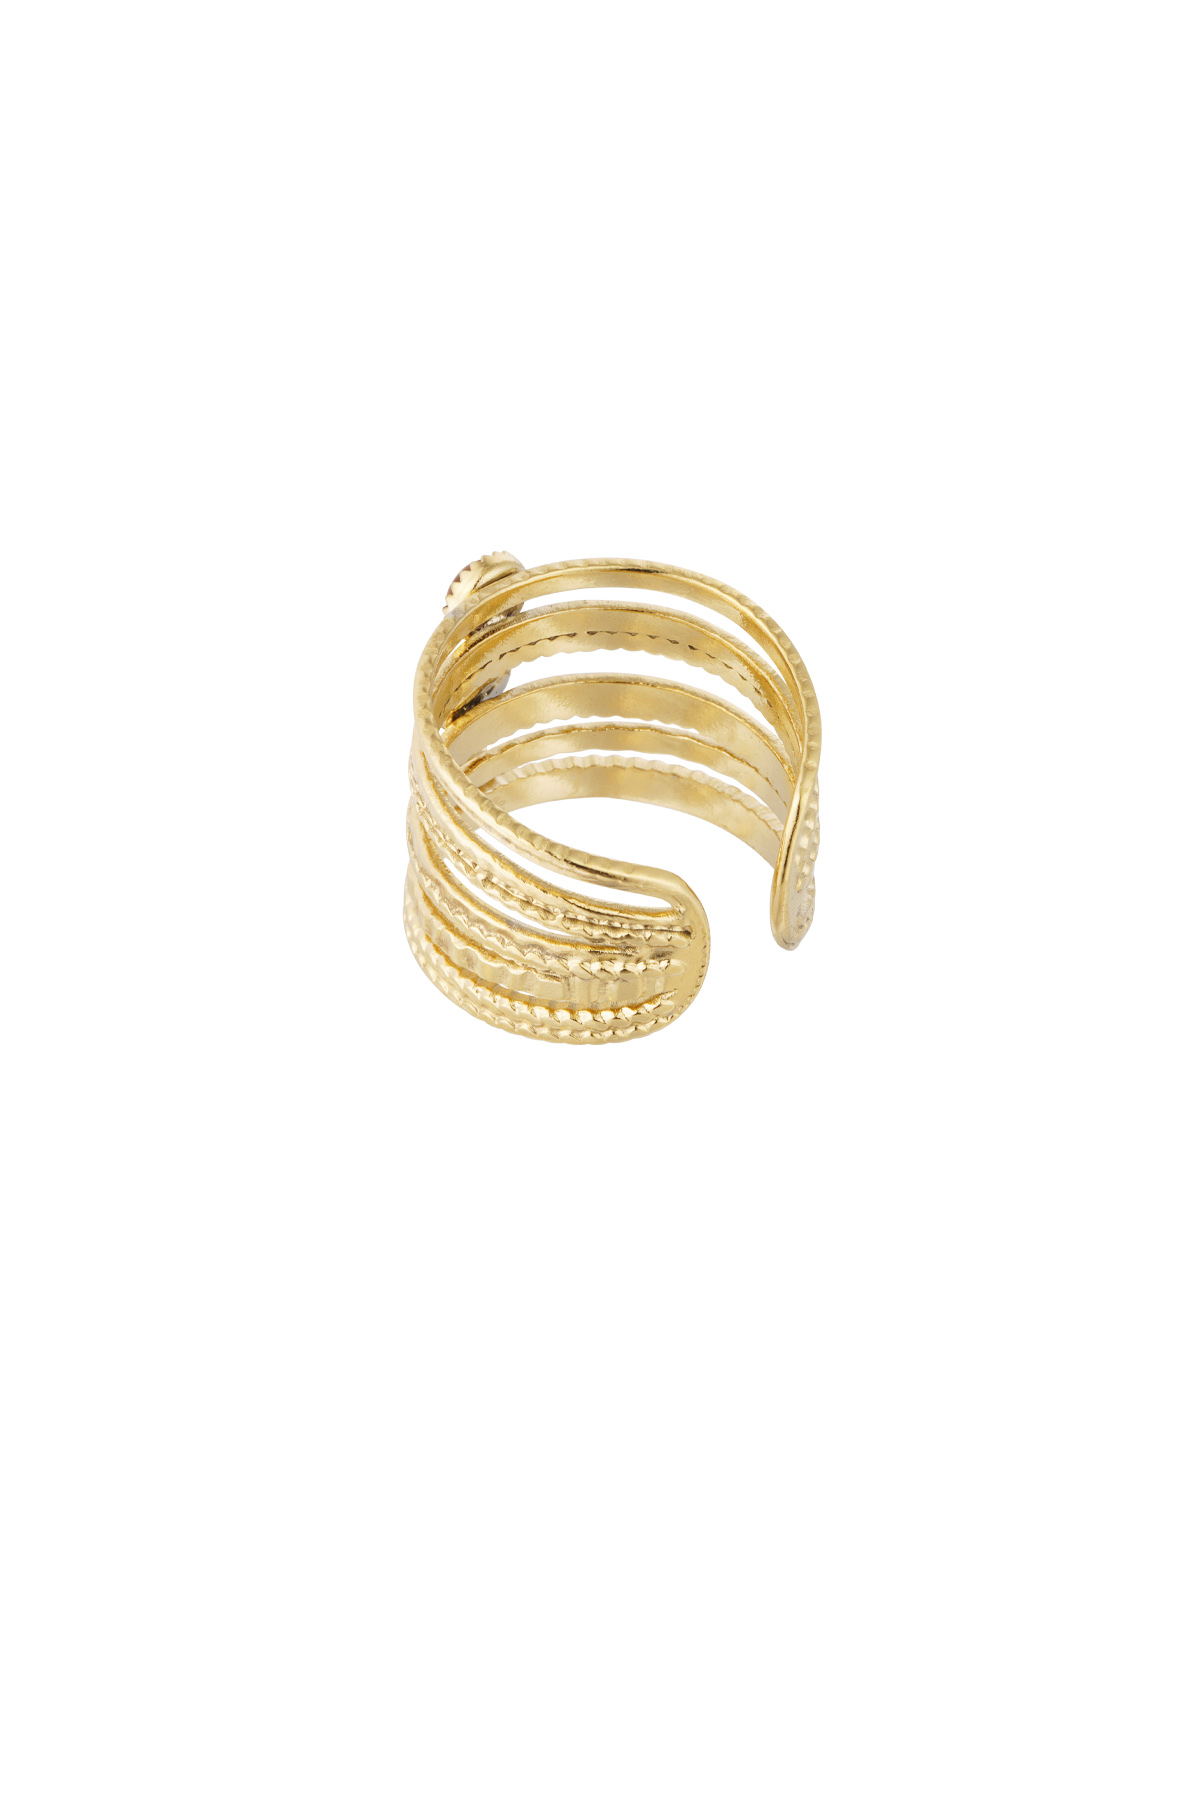 Ring three-layer stone - gold/pink h5 Picture6